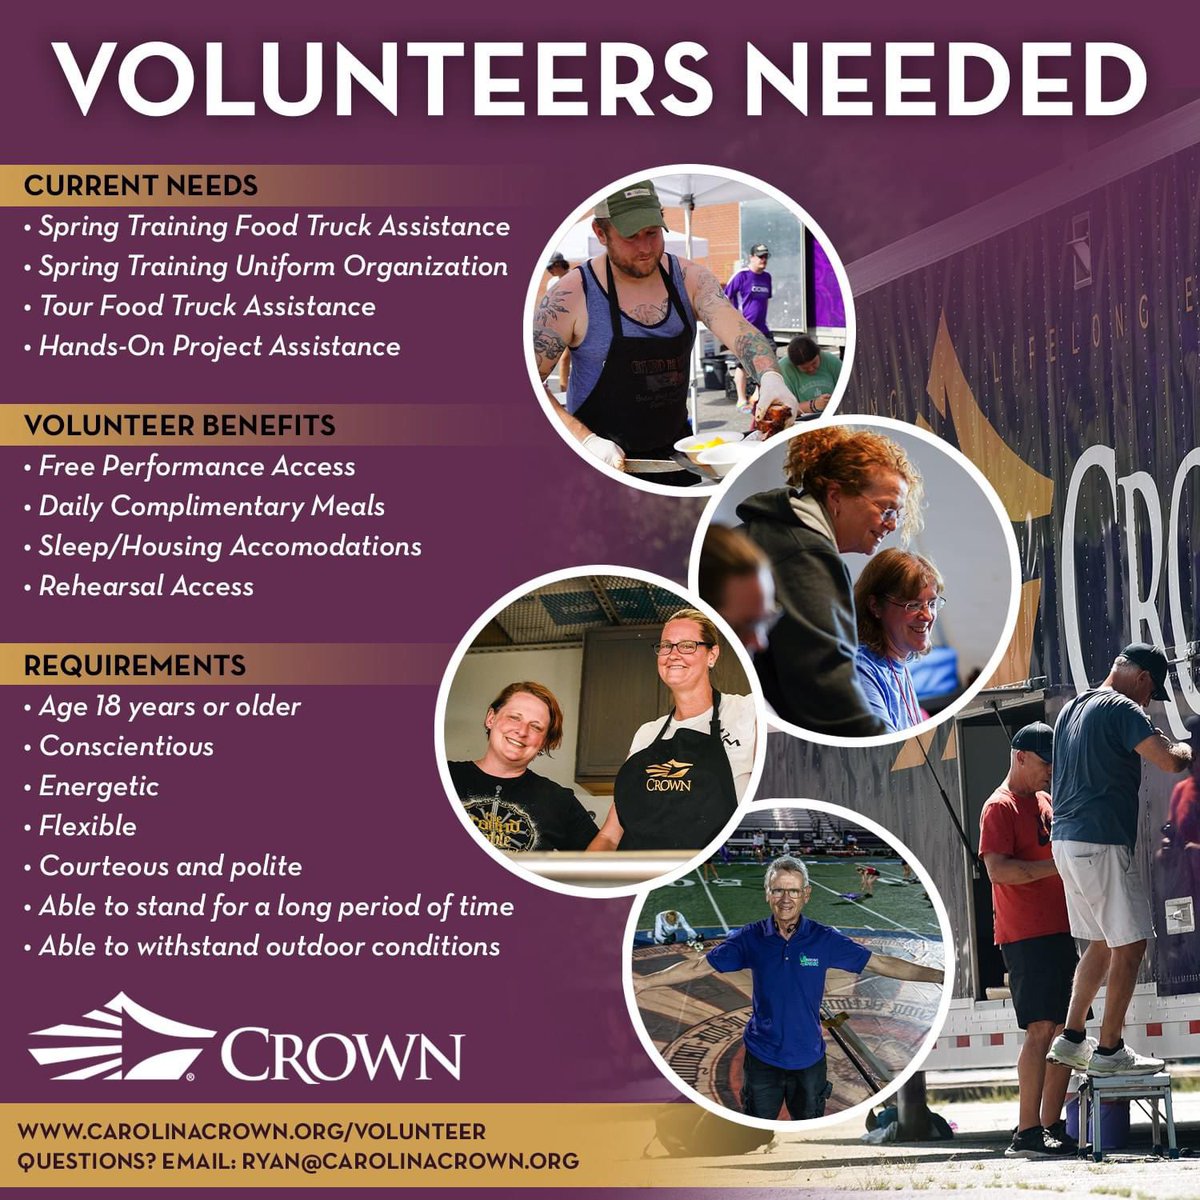 Summer is around the corner and Crown is on the lookout for 𝗩𝗢𝗟𝗨𝗡𝗧𝗘𝗘𝗥𝗦 who are eager to bring their energy and expertise to the corps! ➡ Fill out the Volunteer Form: bit.ly/2024crownvolun… or visit, carolinacrown.org/volunteer